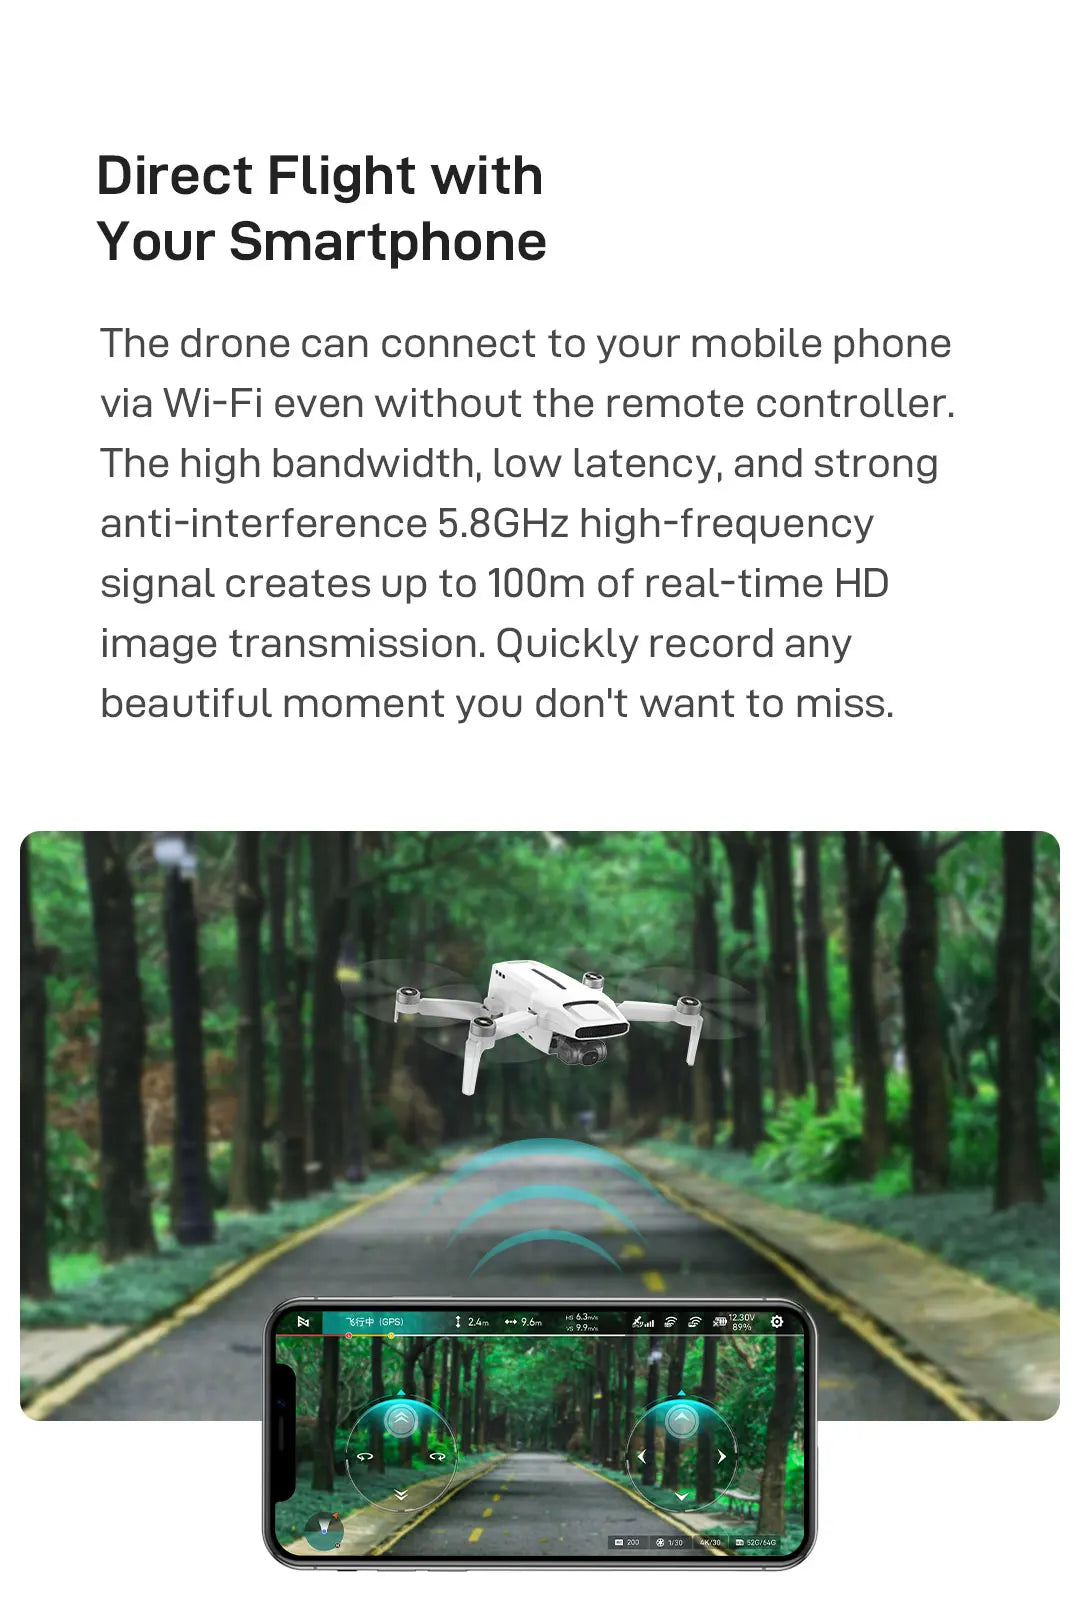 FIMI x8 Mini Drone, the drone can connect to your mobile phone via Wi-Fi even without the remote controller .